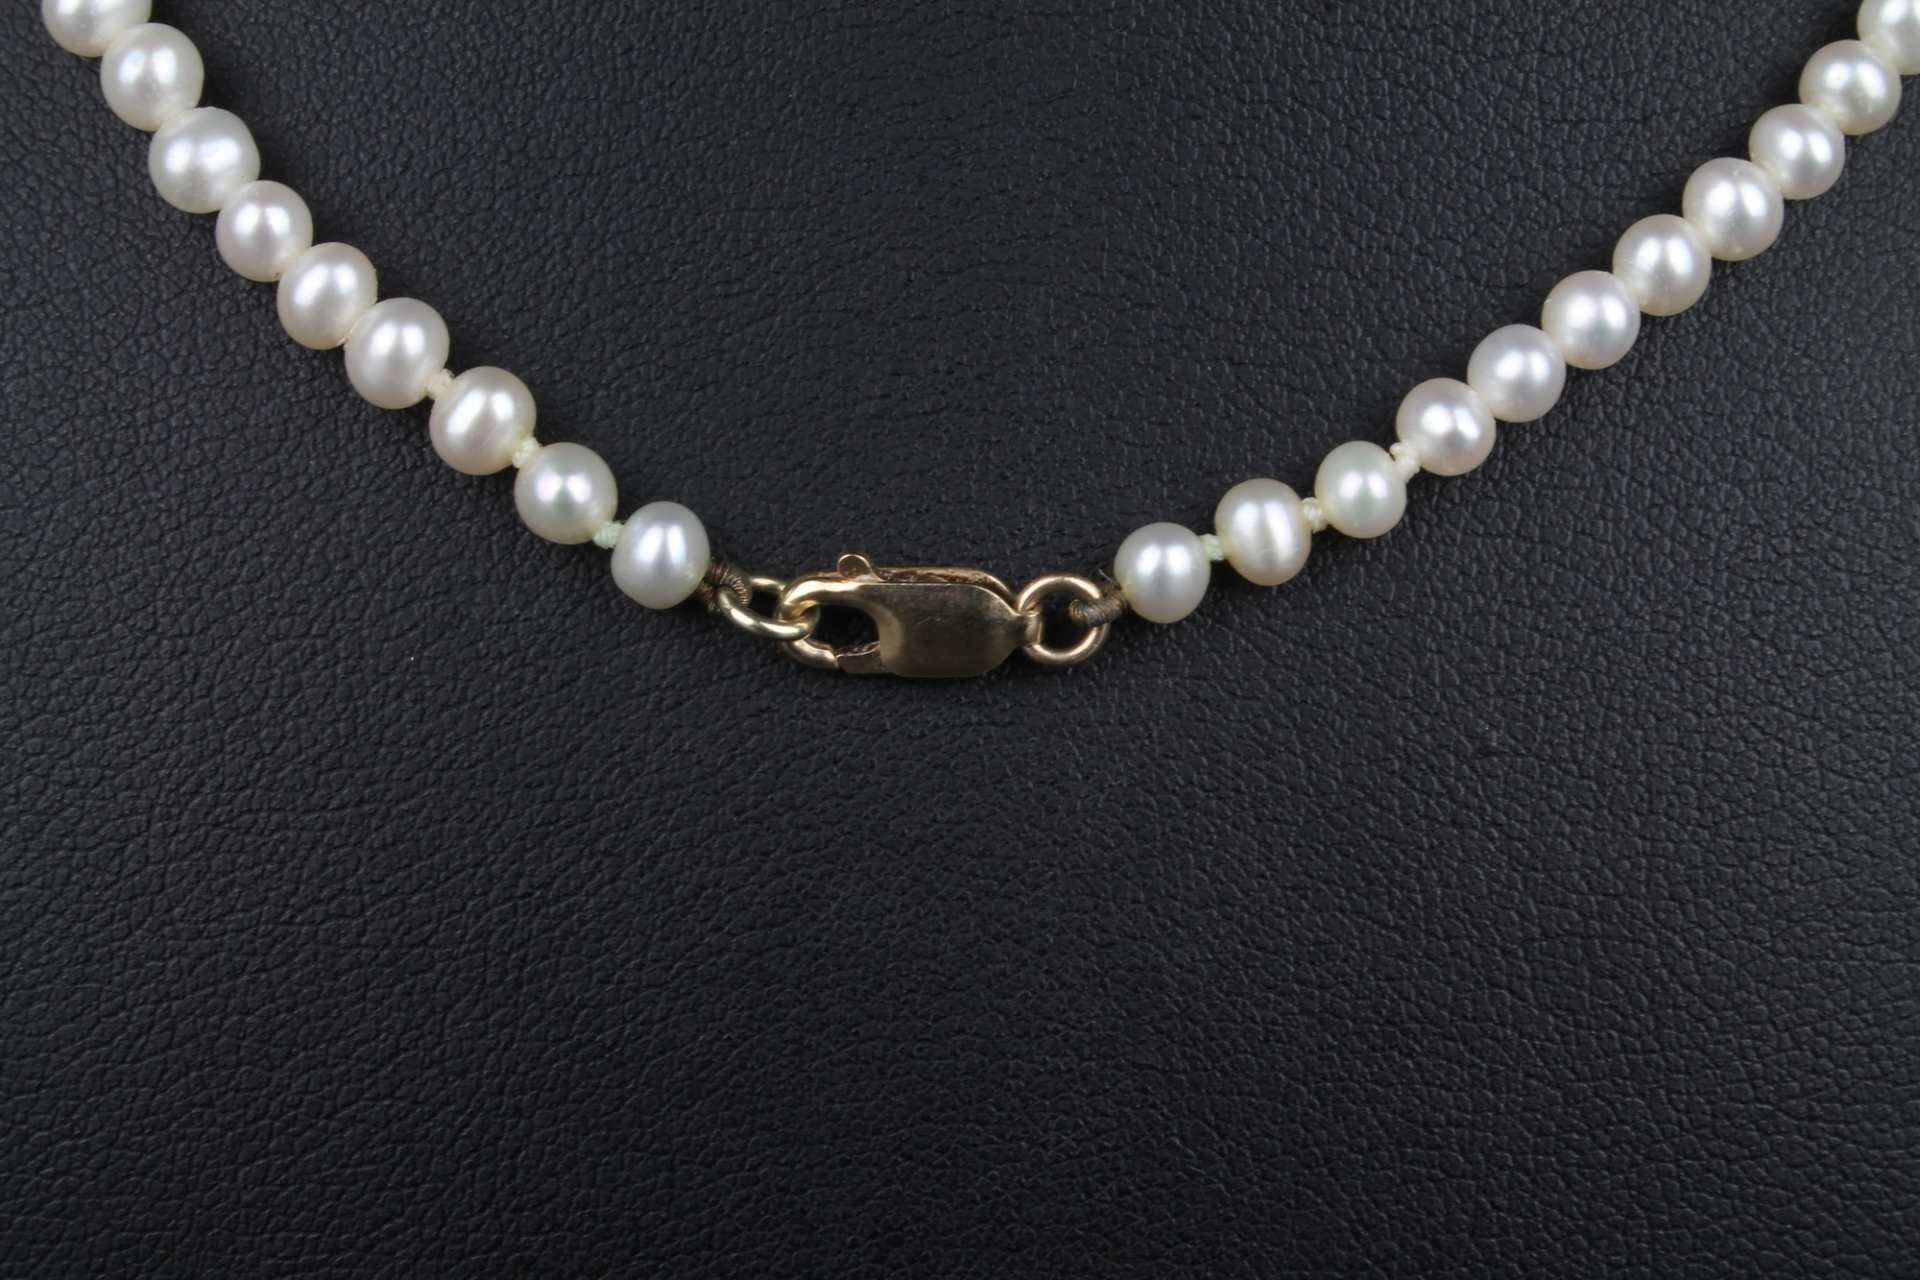 Aquamarin Perlenkette 585 Gold, pearl necklace gold lock, - Image 3 of 4